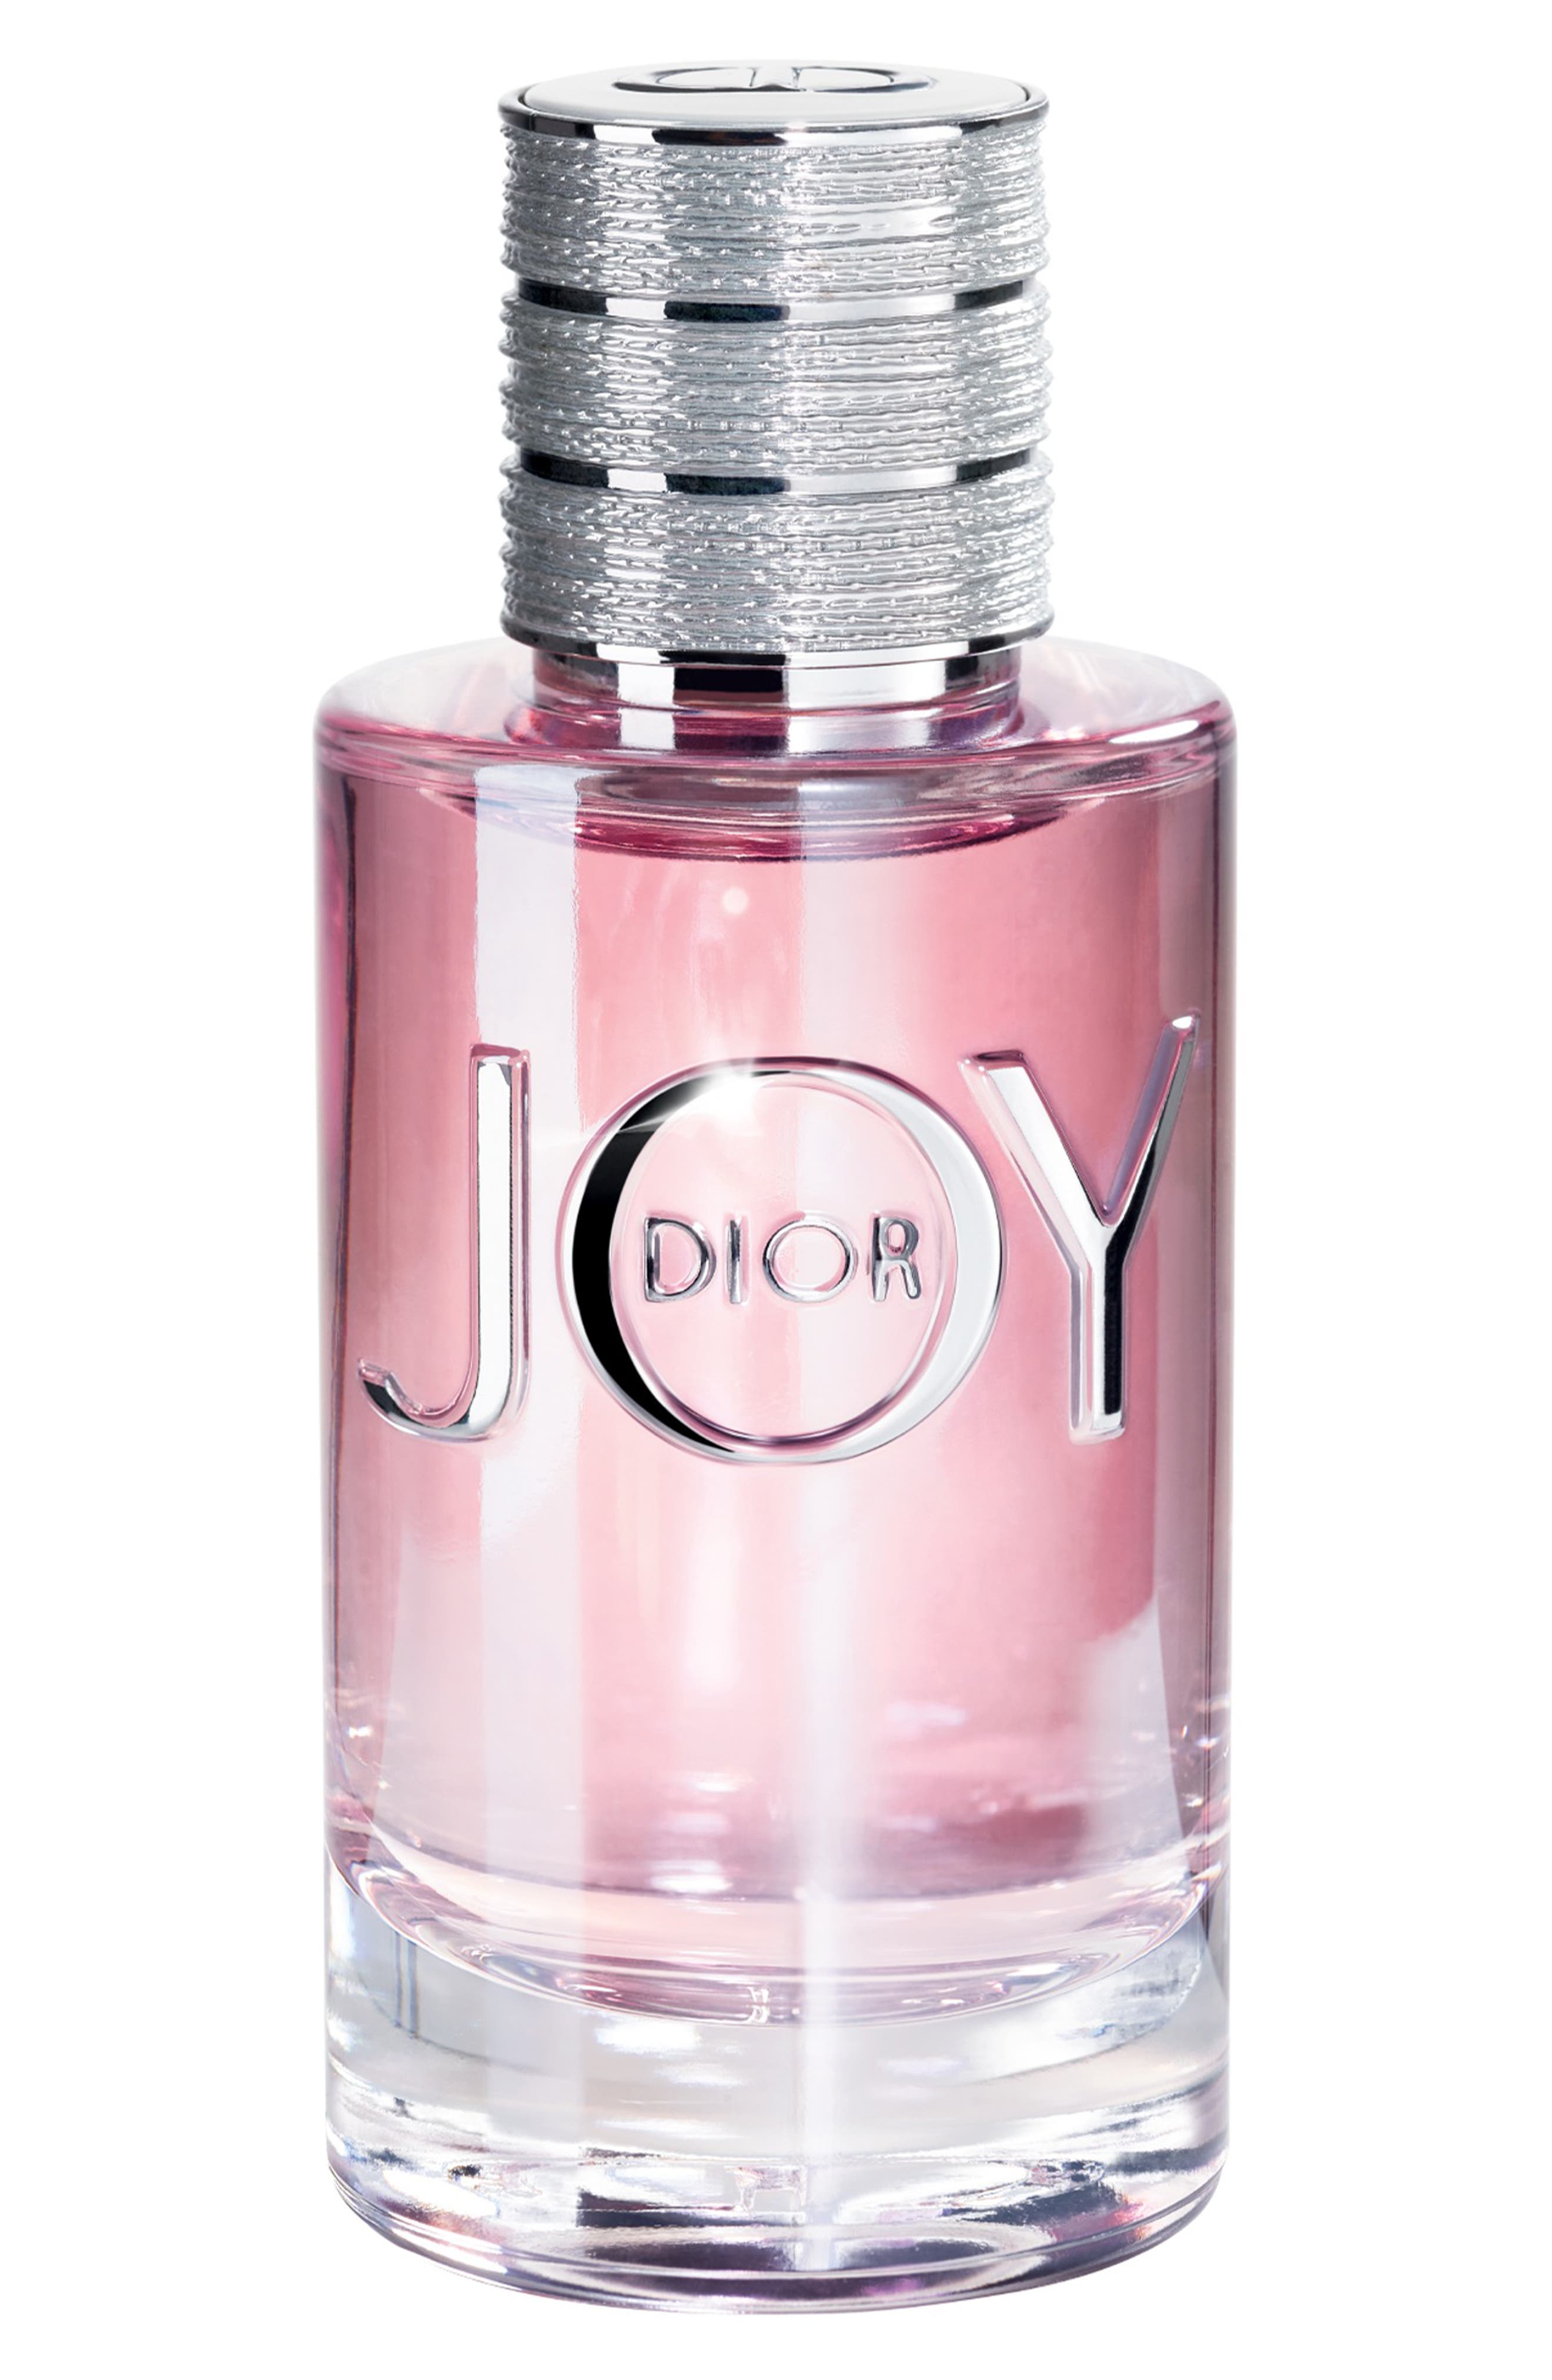 dior joy gift with purchase